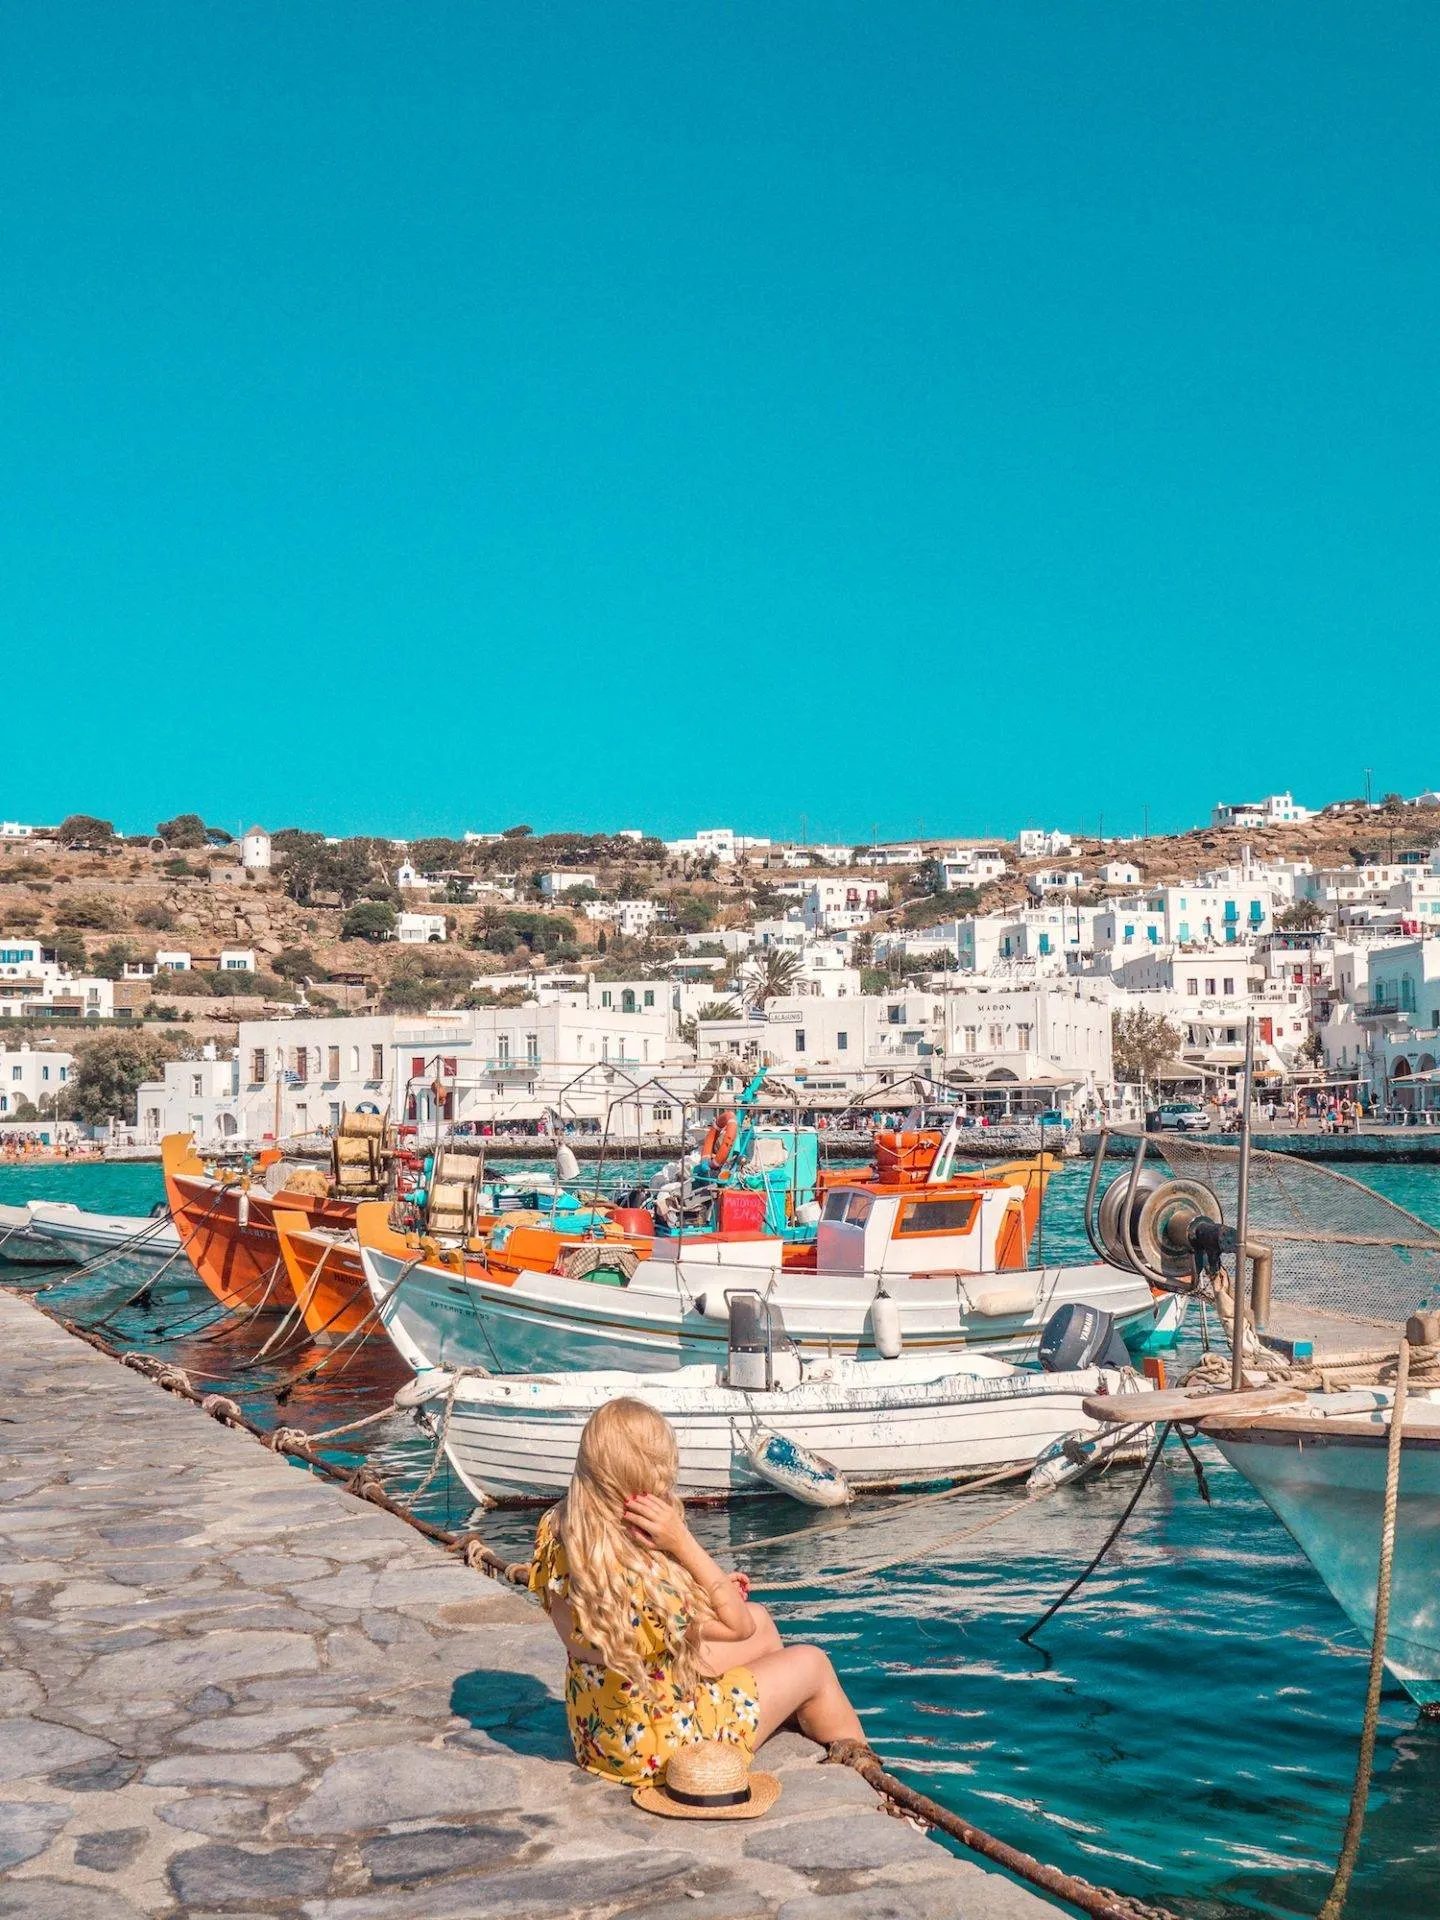 Mykonos harbor has so much charm and is one of the most instagrammable places in Mykonos. Click the photo to see the rest of my list of the most instagrammable places in Mykonos! 